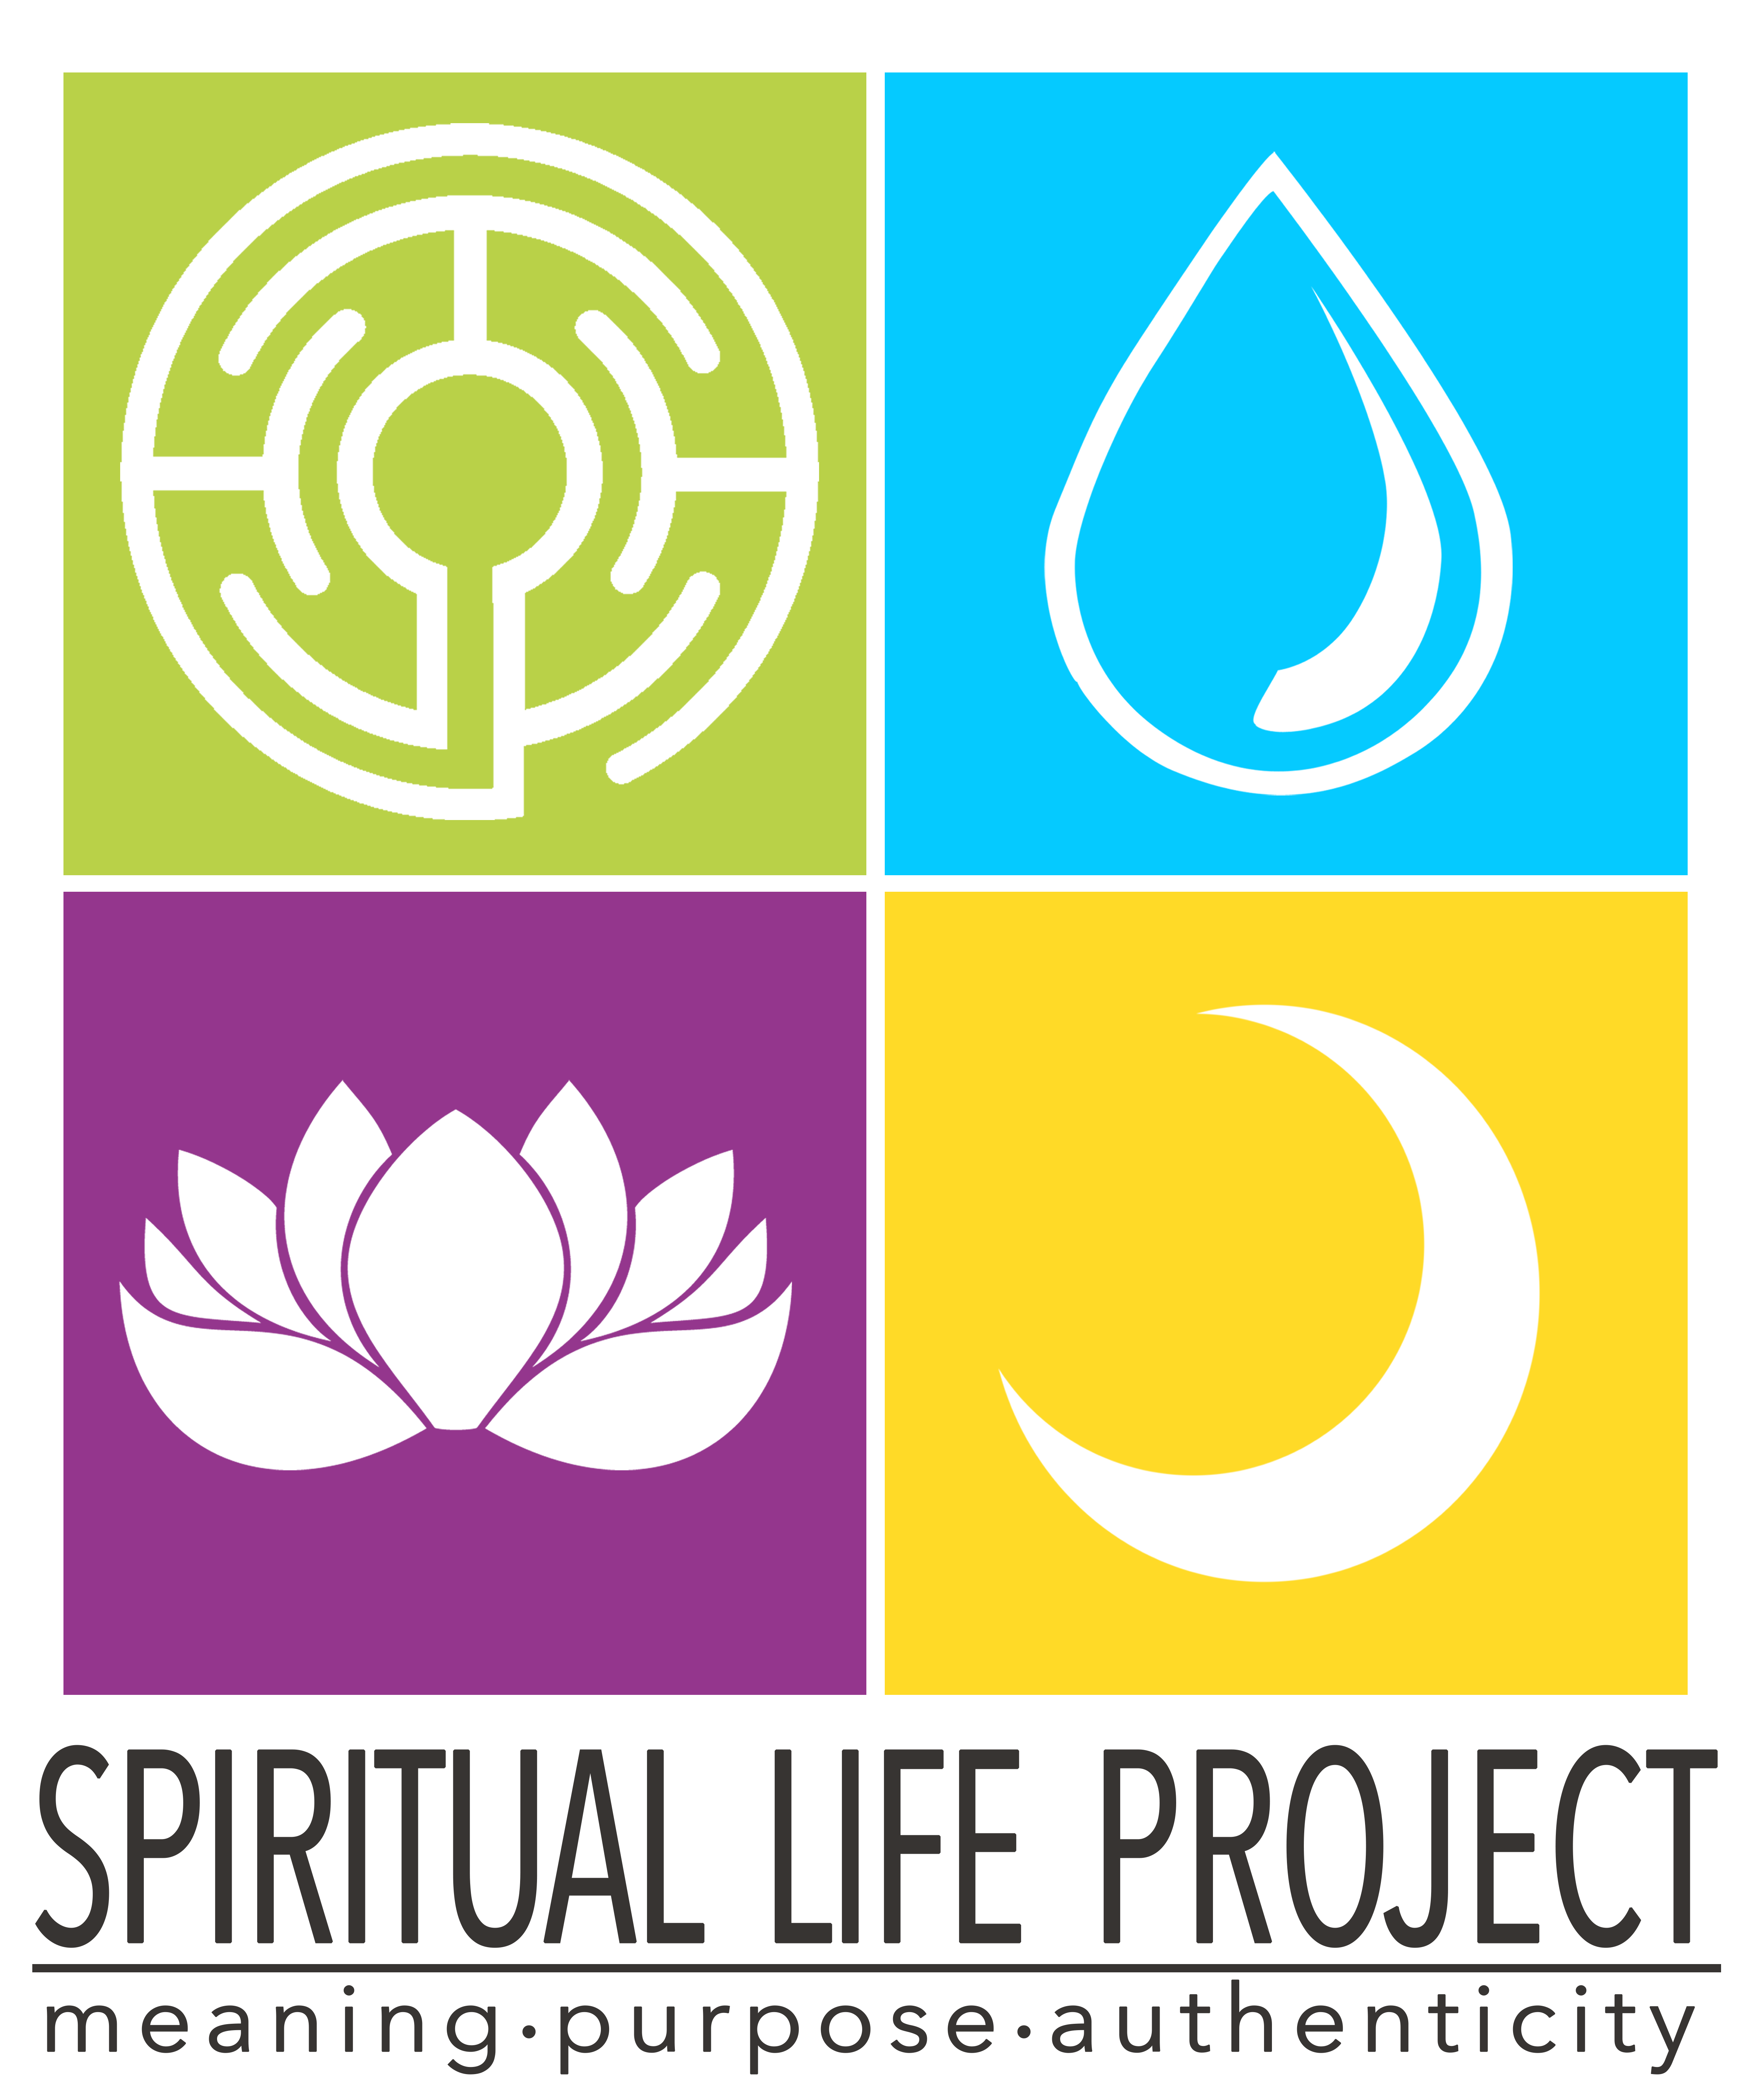 Spiritual Life Project: meaning, purpose, authenticity